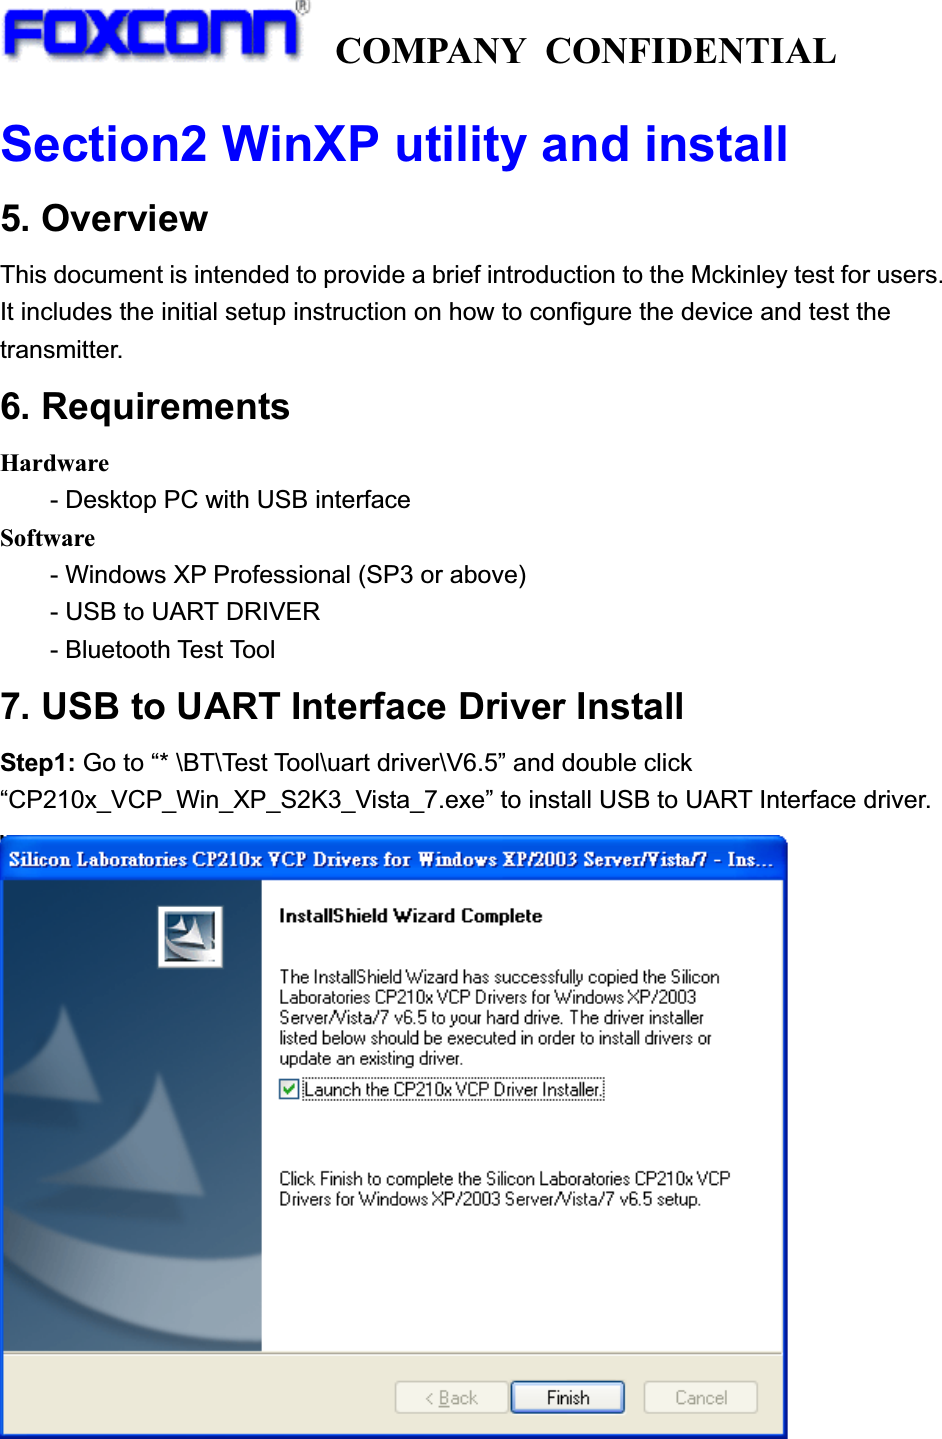   COMPANY CONFIDENTIAL             Section2 WinXP utility and install5. Overview   This document is intended to provide a brief introduction to the Mckinley test for users. It includes the initial setup instruction on how to configure the device and test the transmitter. 6. Requirements Hardware - Desktop PC with USB interface Software - Windows XP Professional (SP3 or above) - USB to UART DRIVER     - Bluetooth Test Tool 7. USB to UART Interface Driver Install   Step1: Go to “* \BT\Test Tool\uart driver\V6.5” and double click “CP210x_VCP_Win_XP_S2K3_Vista_7.exe” to install USB to UART Interface driver. 